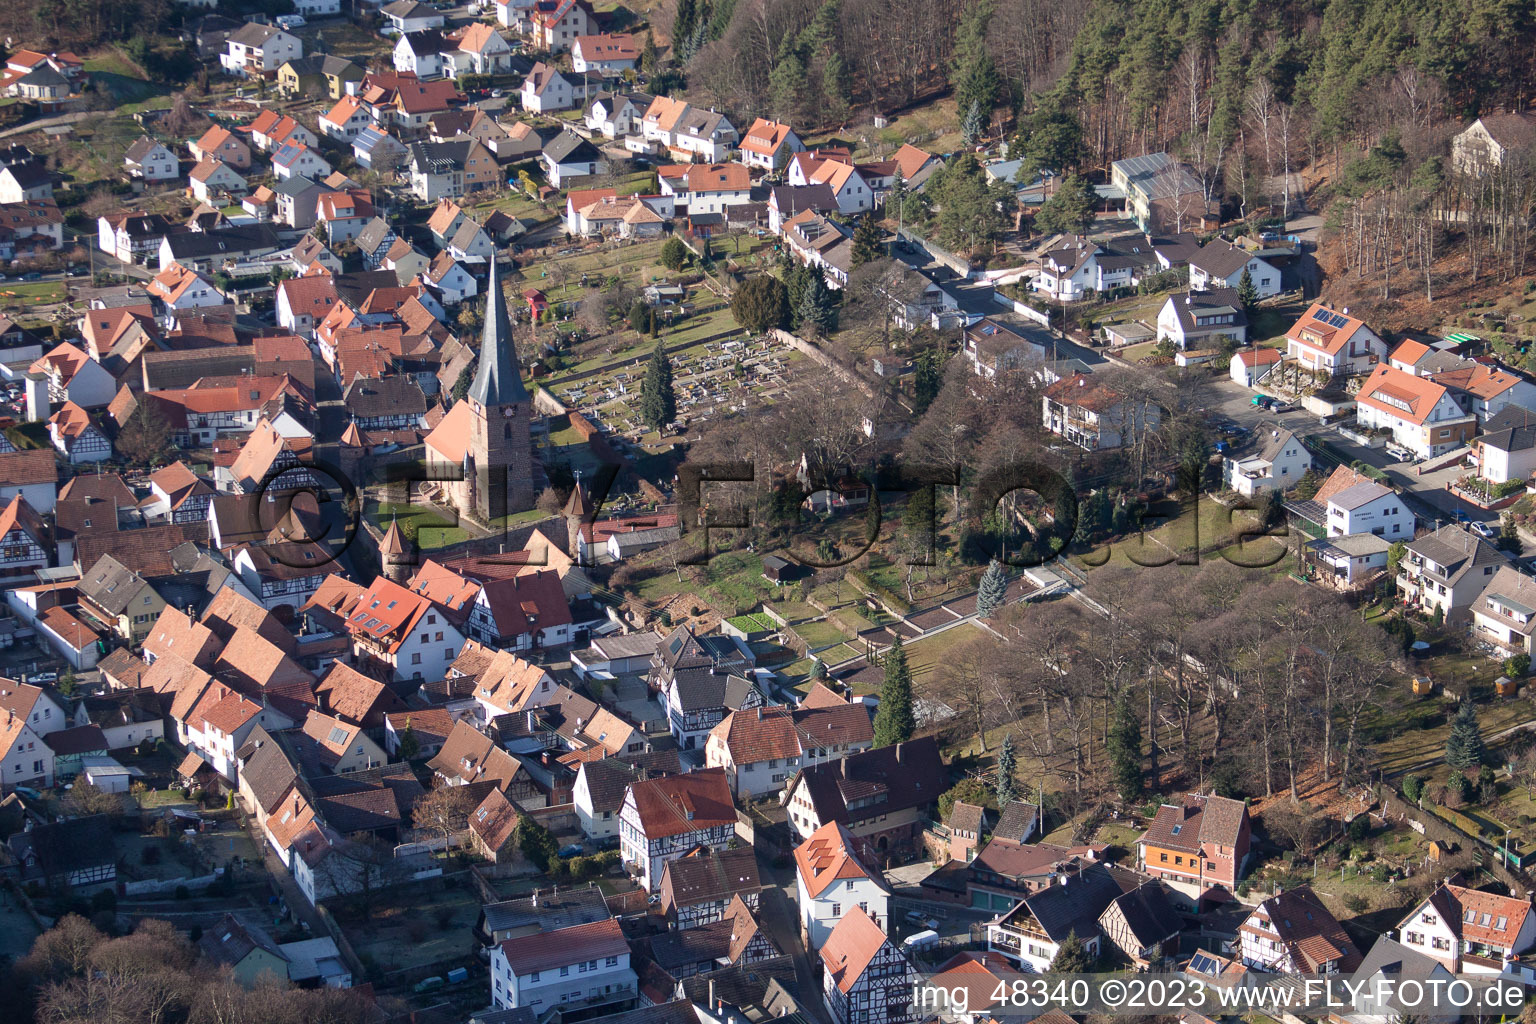 Dörrenbach in the state Rhineland-Palatinate, Germany from the drone perspective